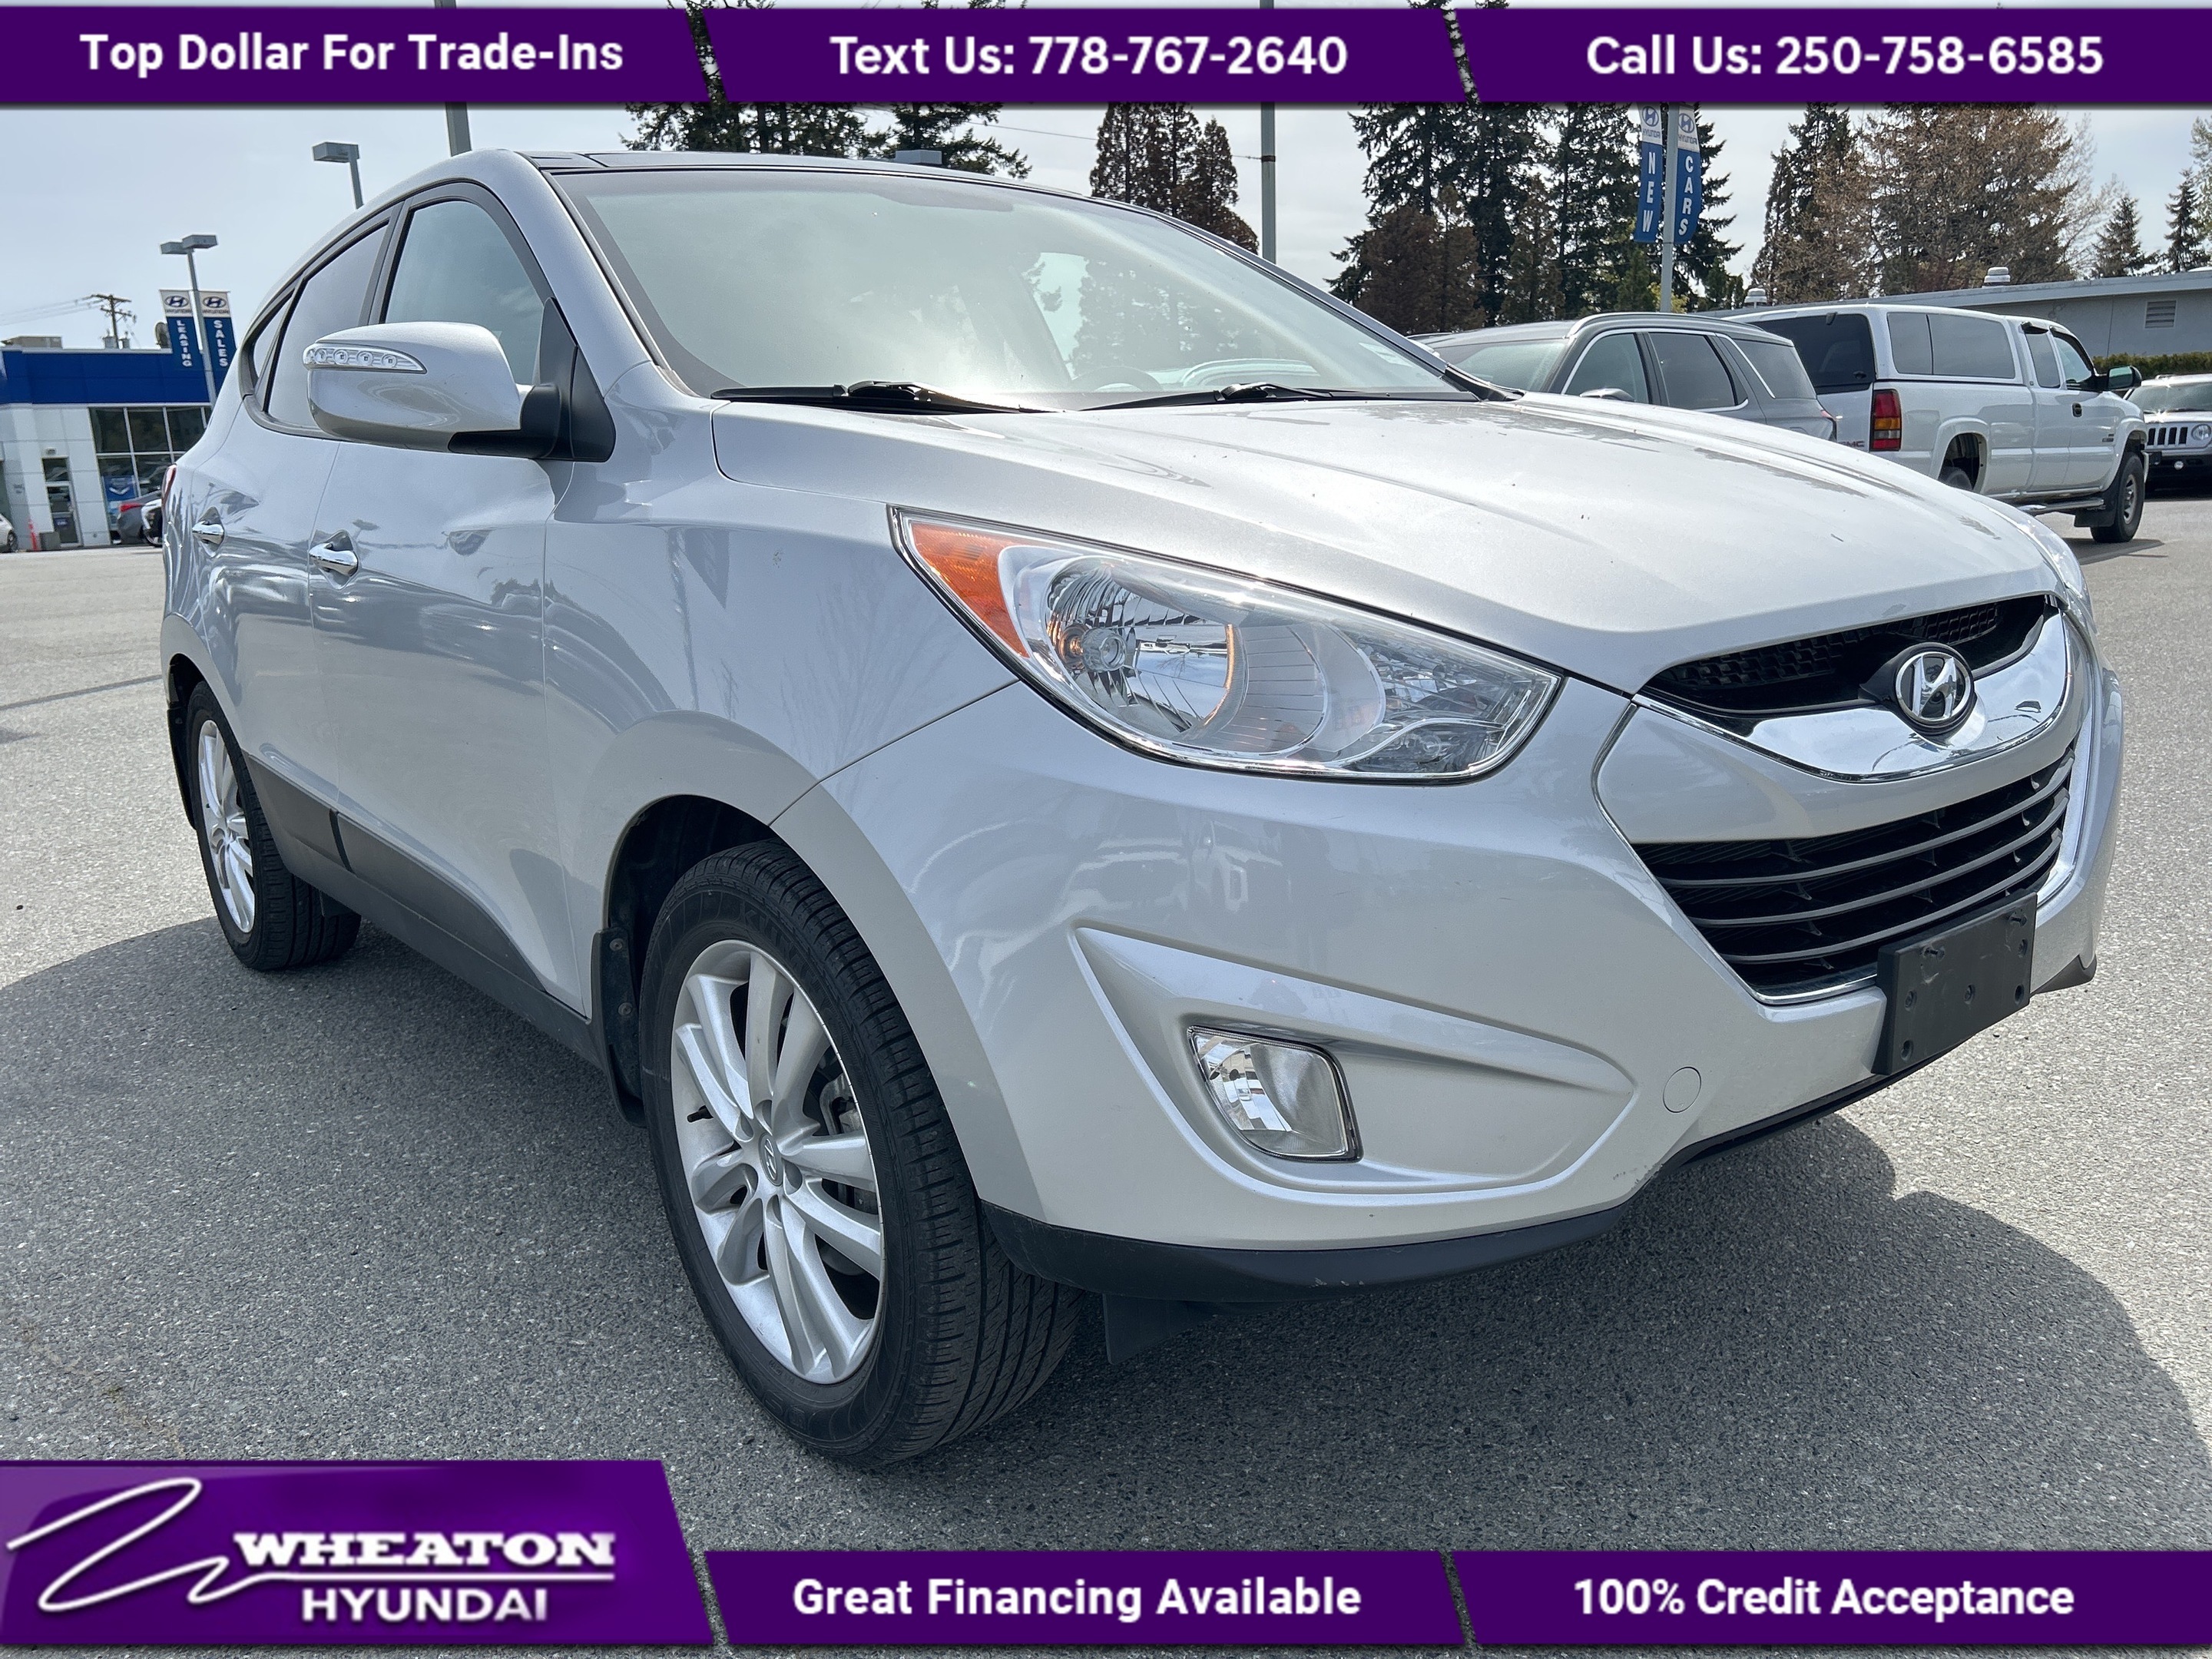 2013 Hyundai Tucson Limited, One Owner, BC Car, Trade in, Navigation, 